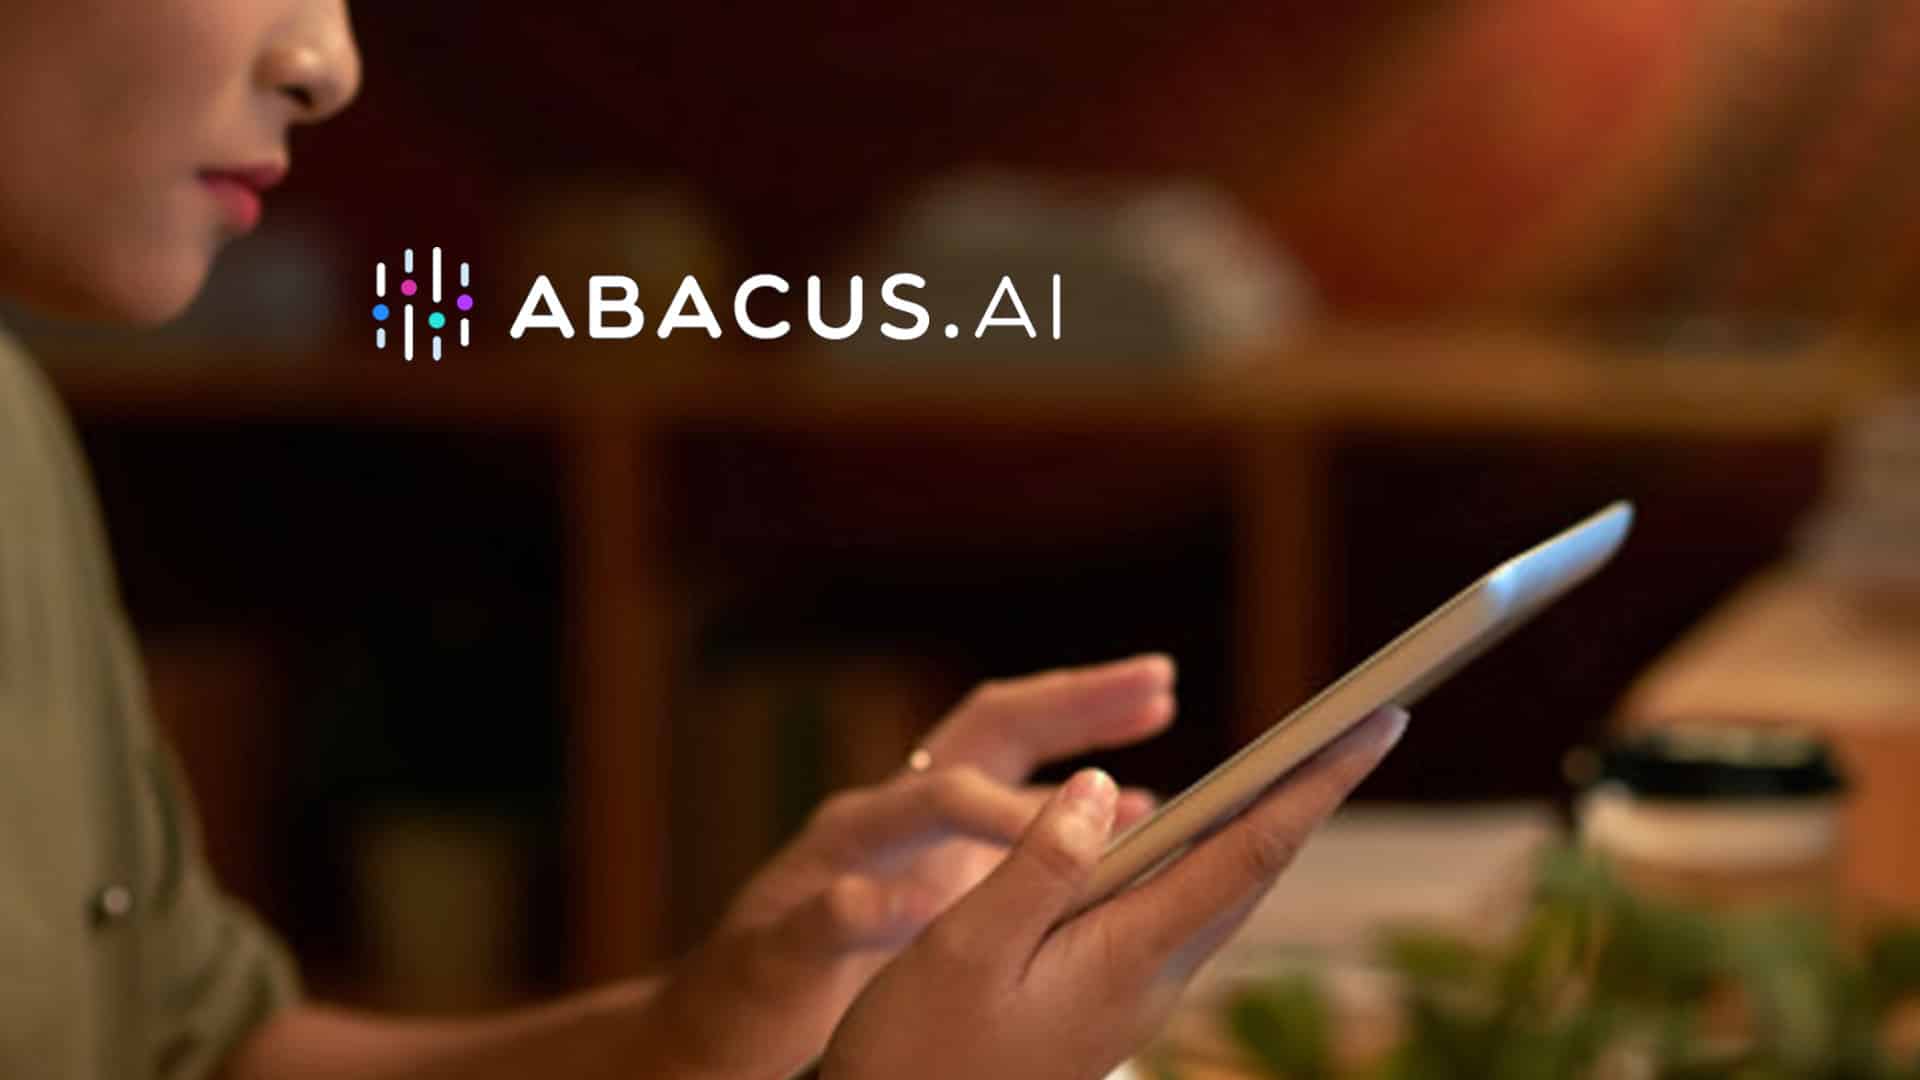 Abacus.AI to invest USD 50 mn in India, to hire 200 people in India R&D unit